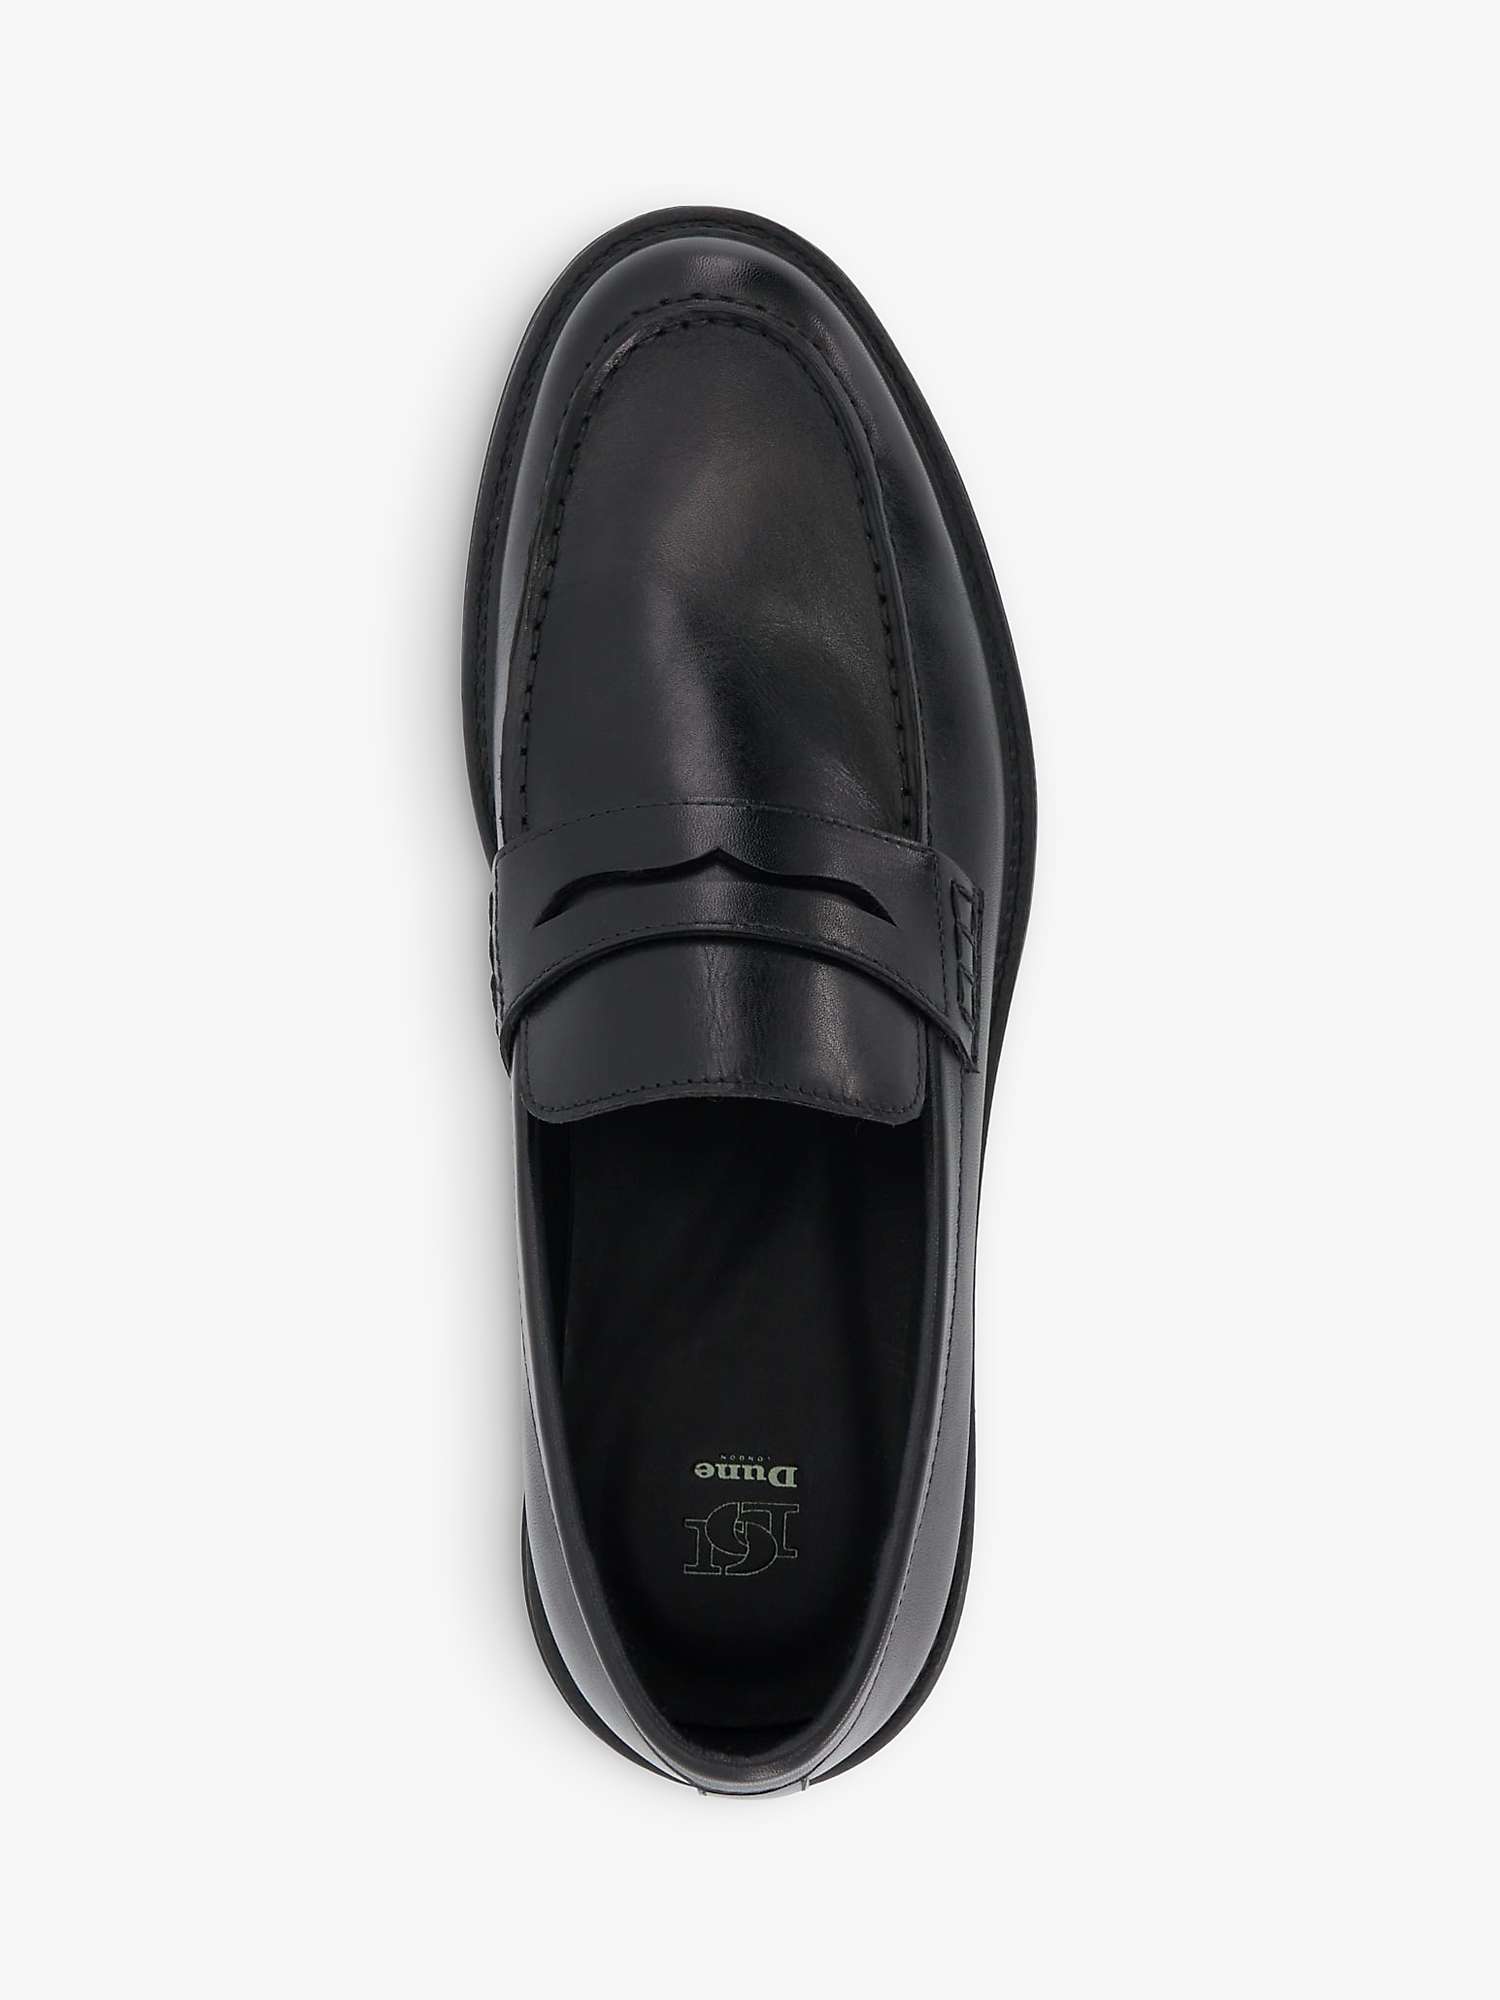 Buy Dune Banking Cleated Sole Penny Loafers Online at johnlewis.com